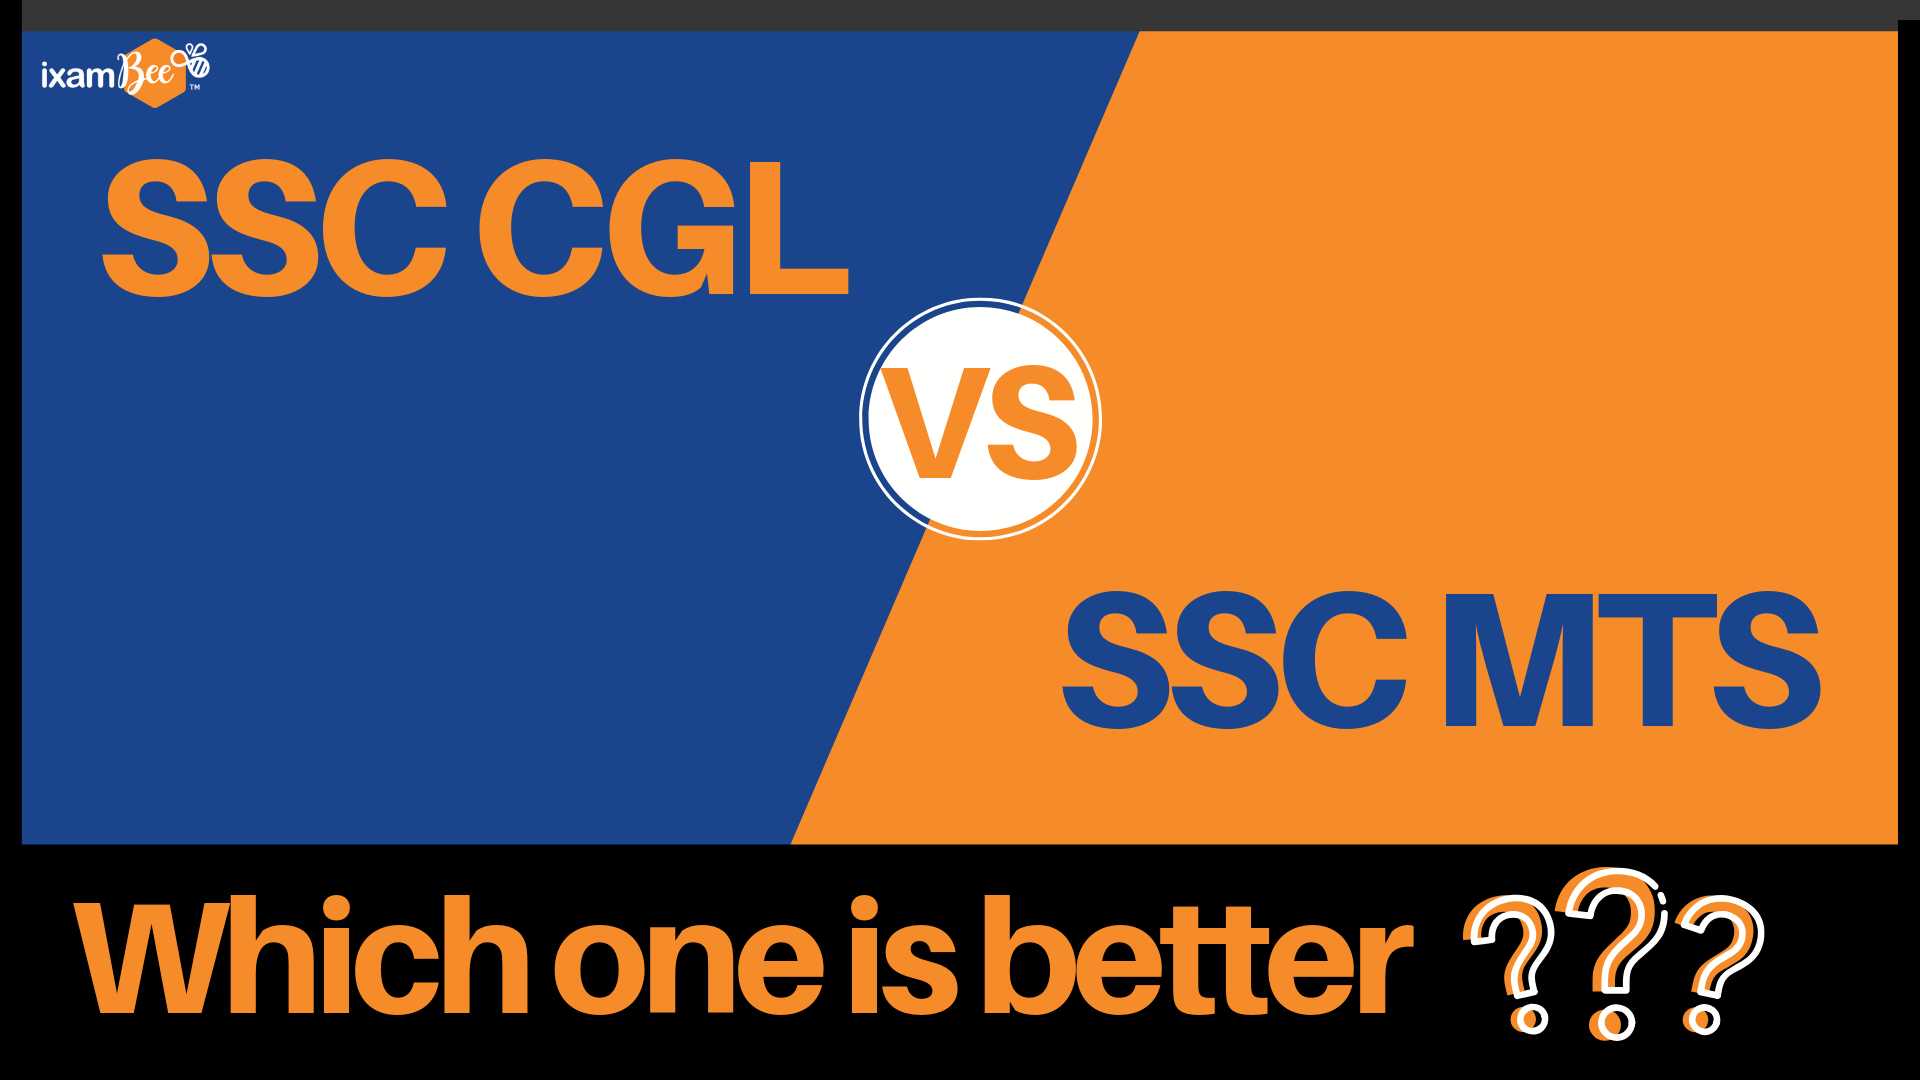 ssc cgl vs ssc mts: Which one is a better job?